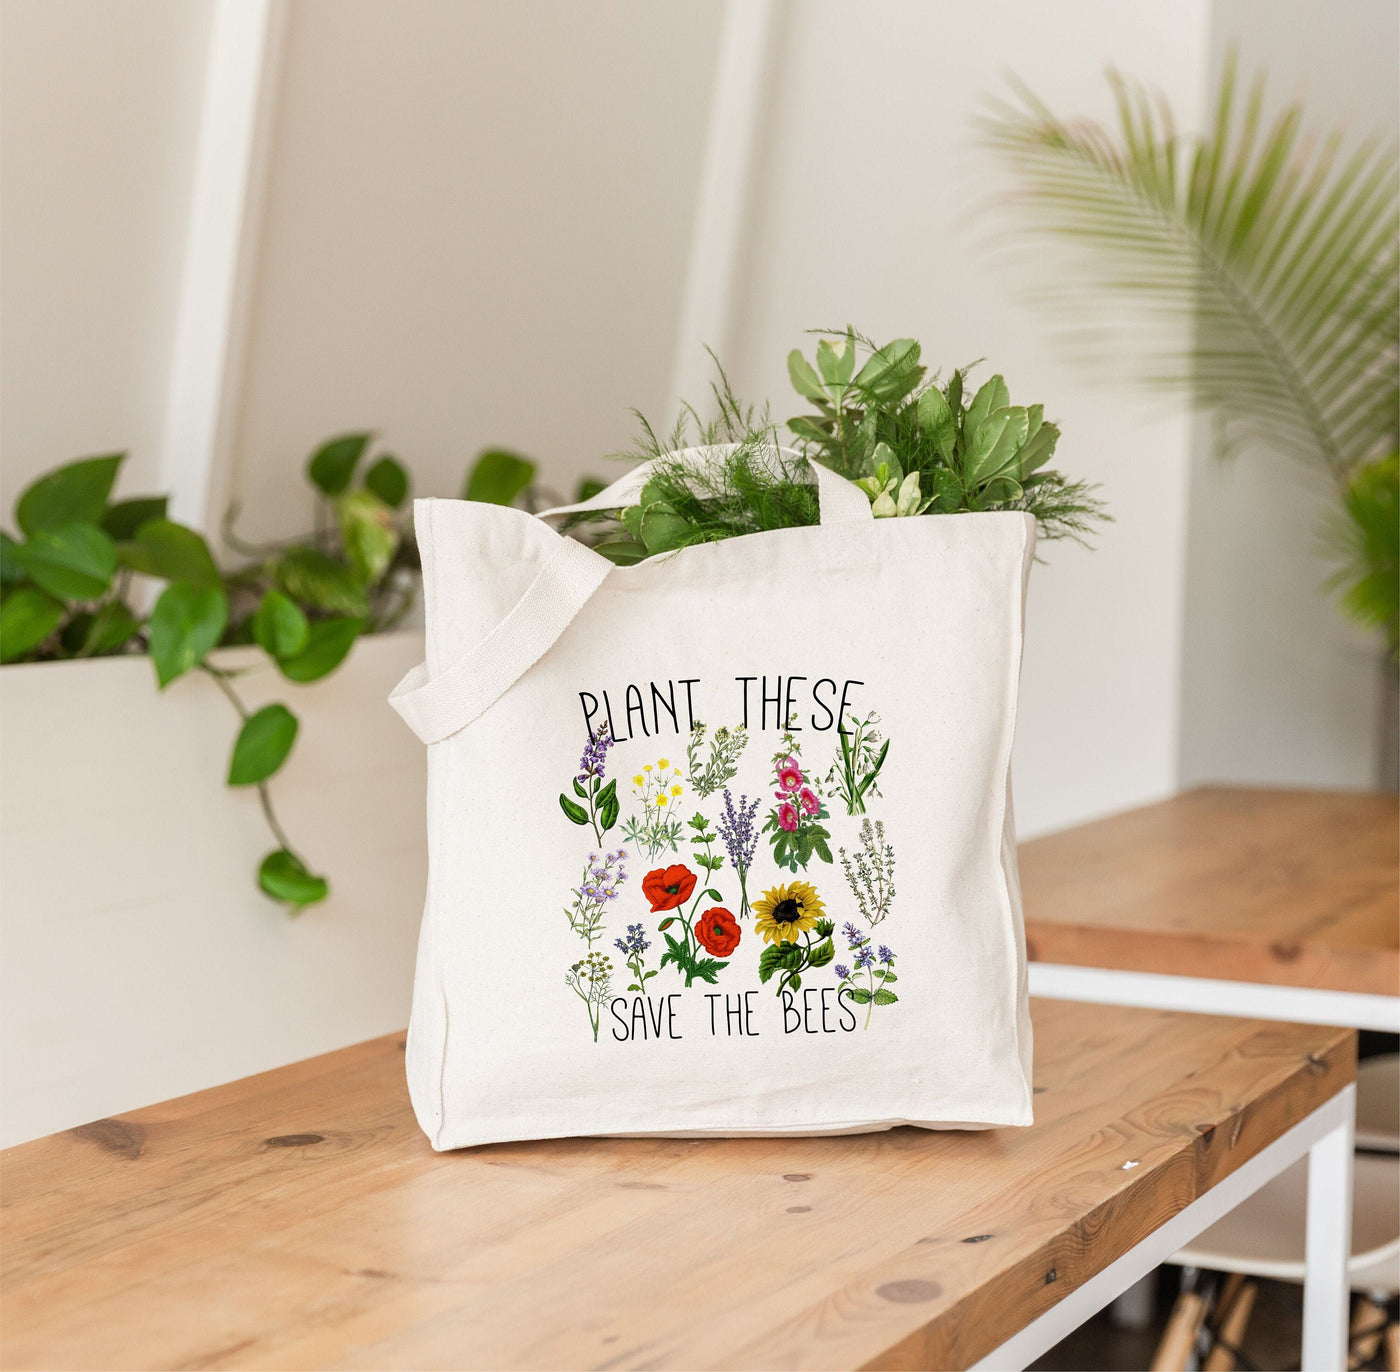 Plant Tote, Bee Tote, Save the Bees, Nature Tote Bag, Plant Tote Bag, Beekeeper Gift, Beekeeper Bag, Gift for Gardener, Botanist Gift, Tote